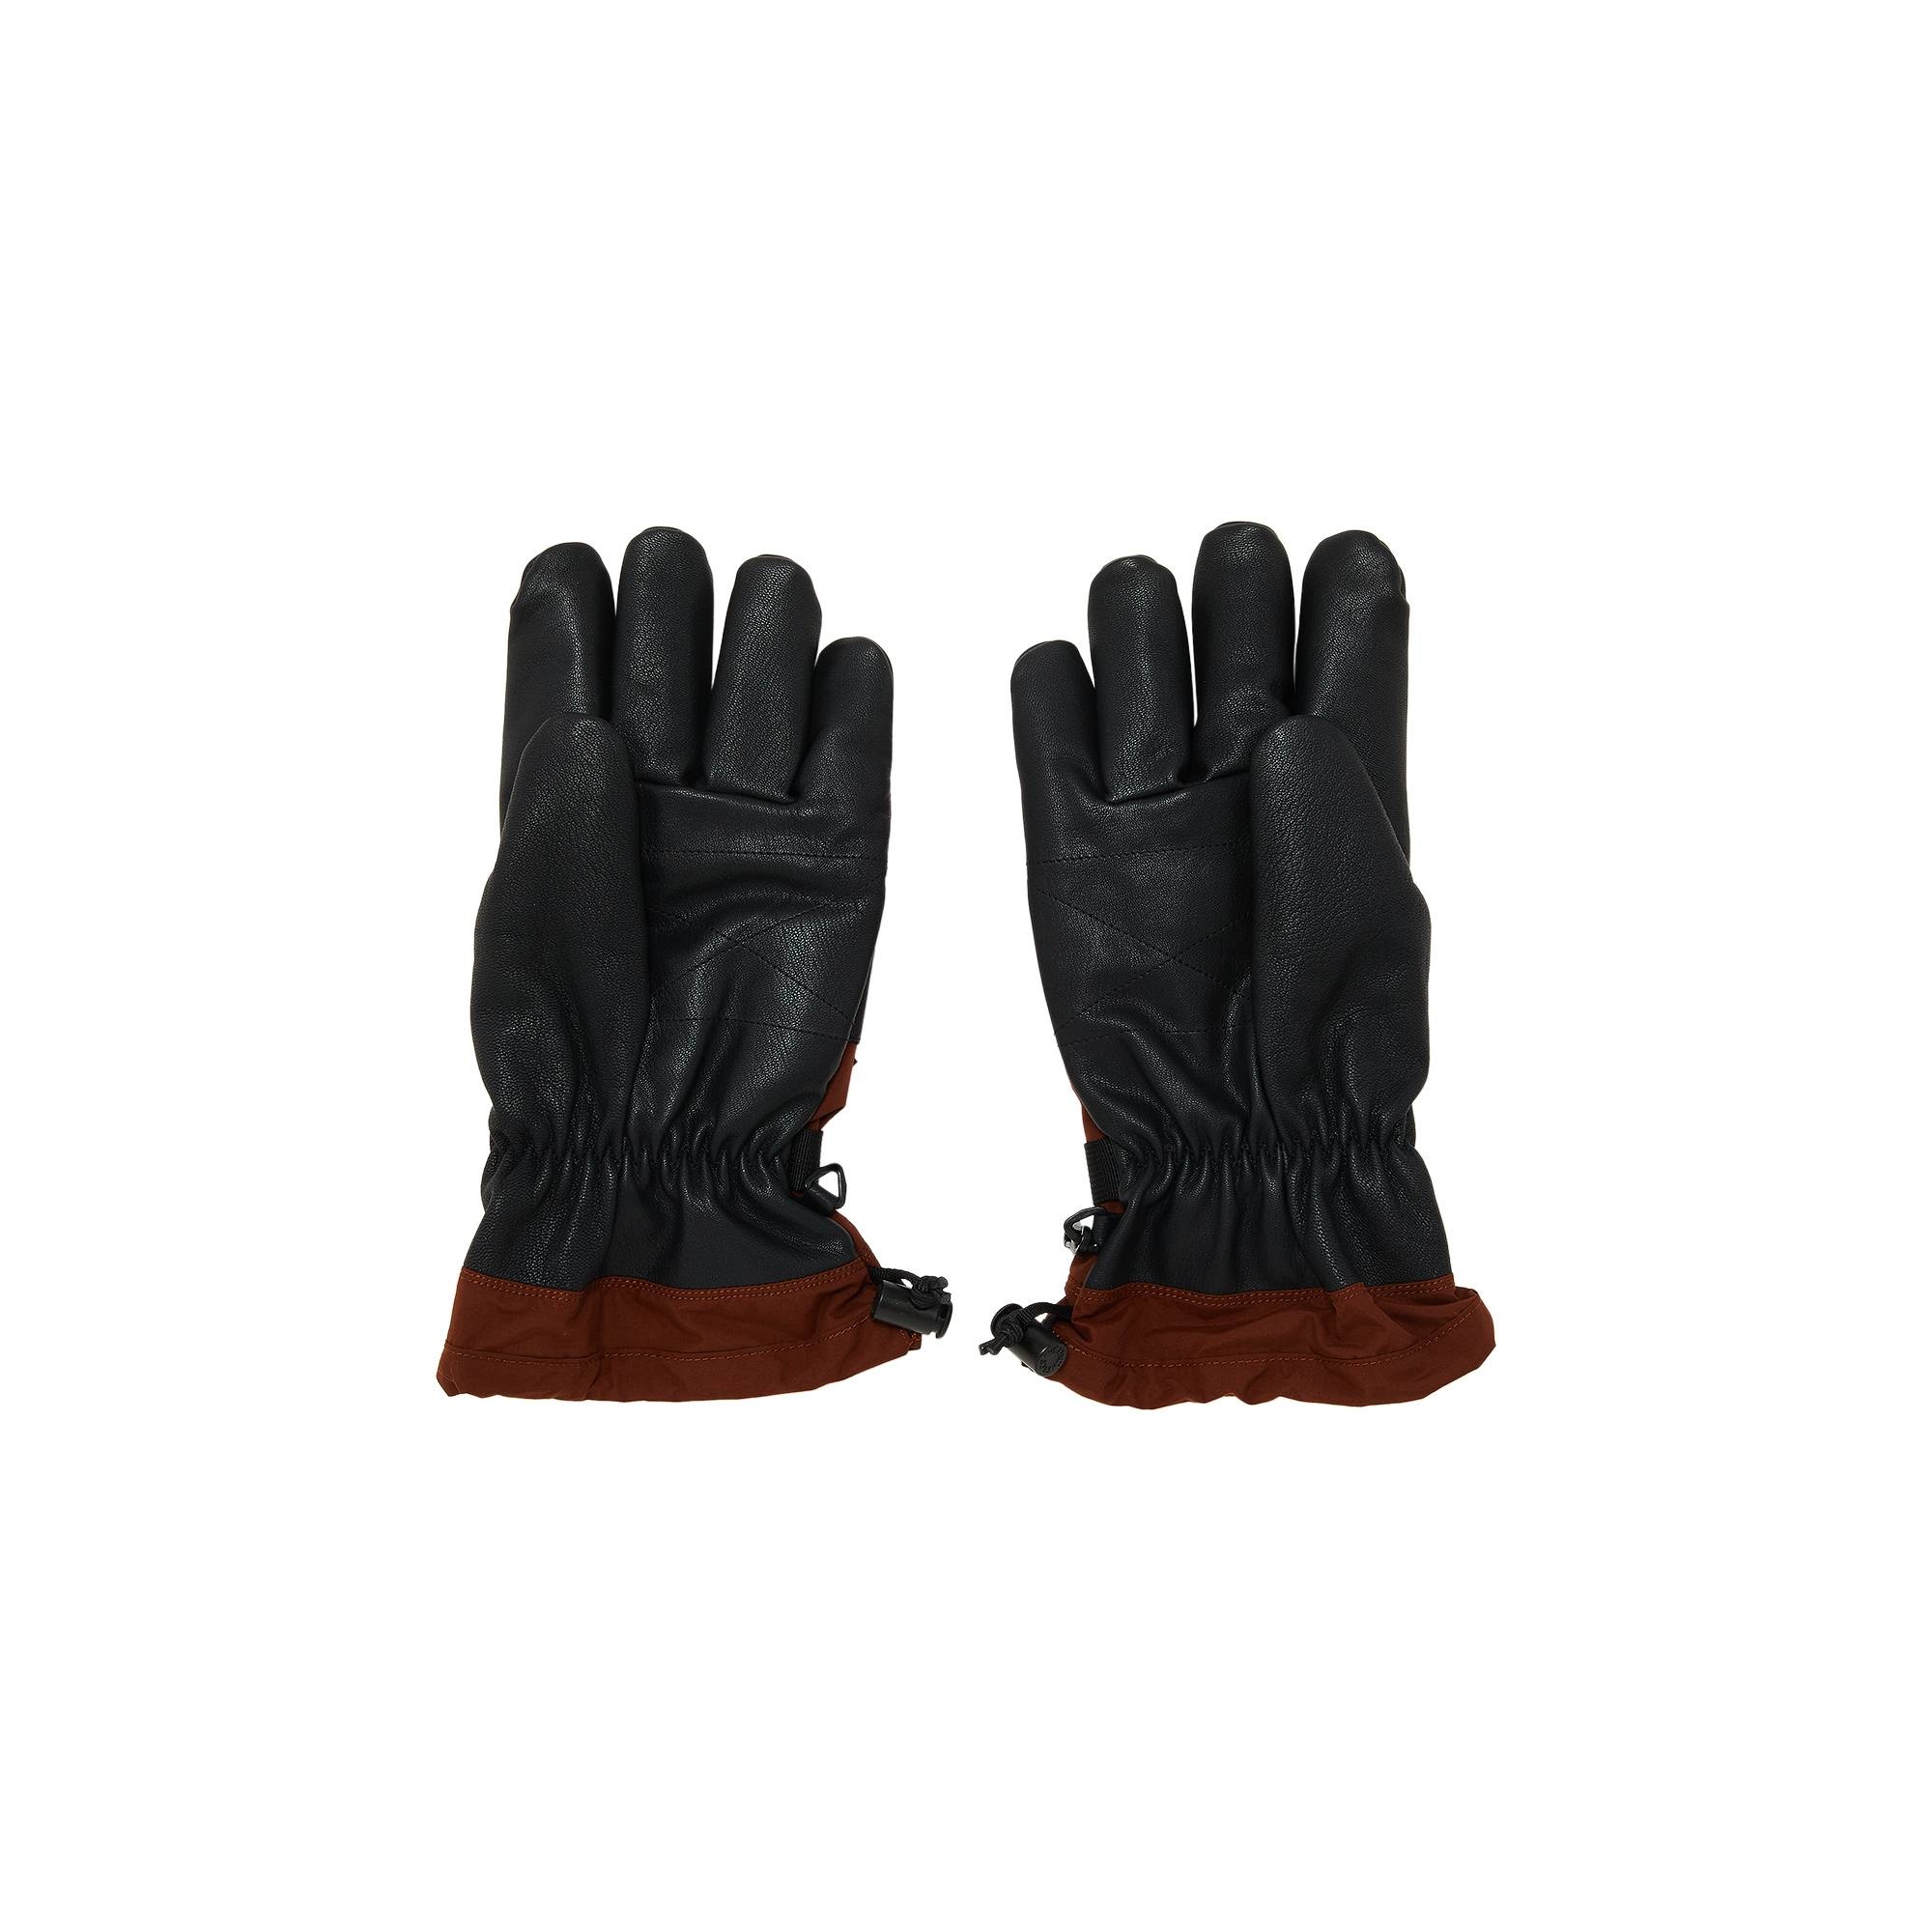 Supreme x The North Face Steep Tech Gloves 'Brown' - 2